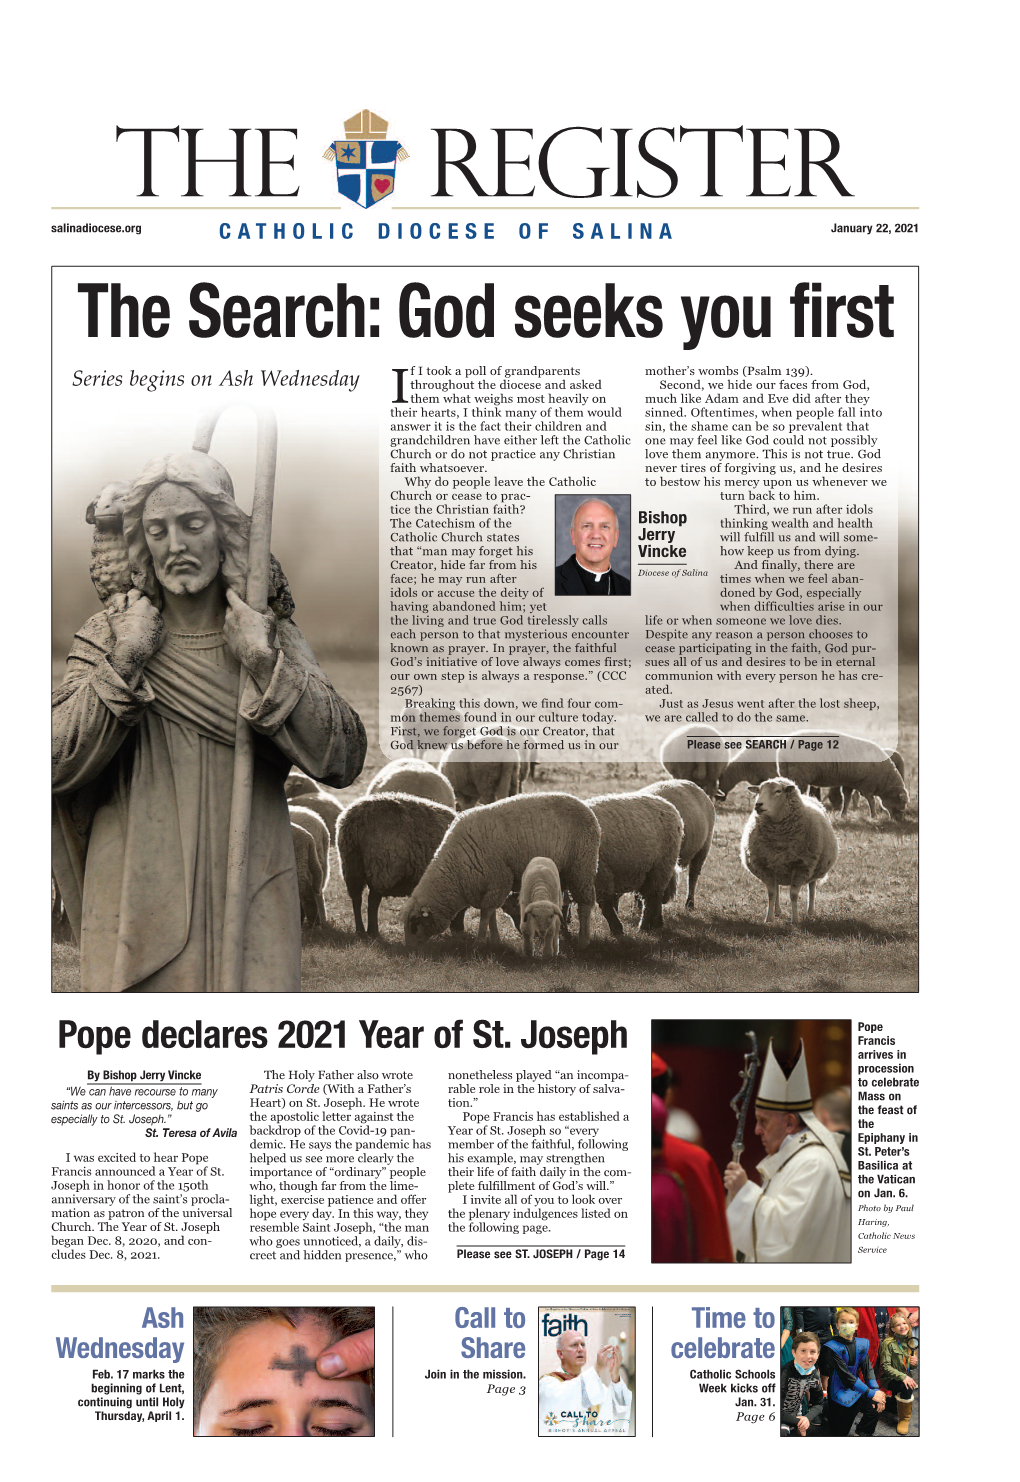 God Seeks You First Pope Declares 2021 Year of St. Joseph